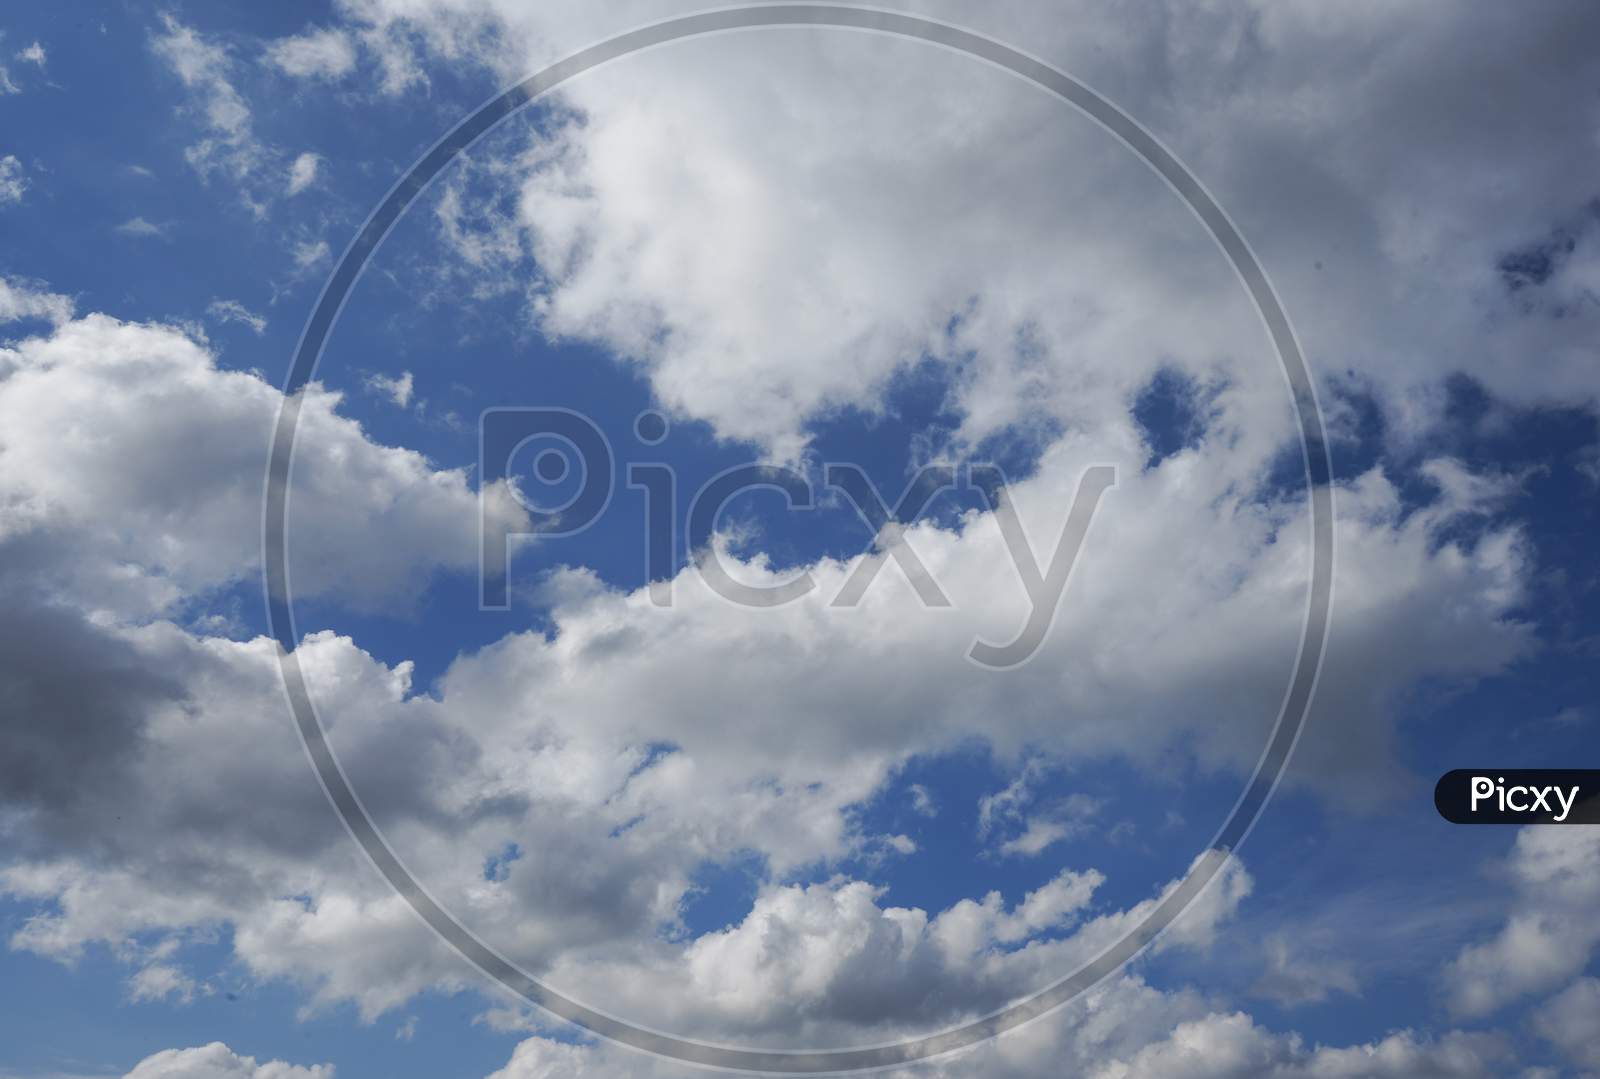 White Clouds Spread All Over The Blue Sky Creating A Contrast And An Abstract Pattern